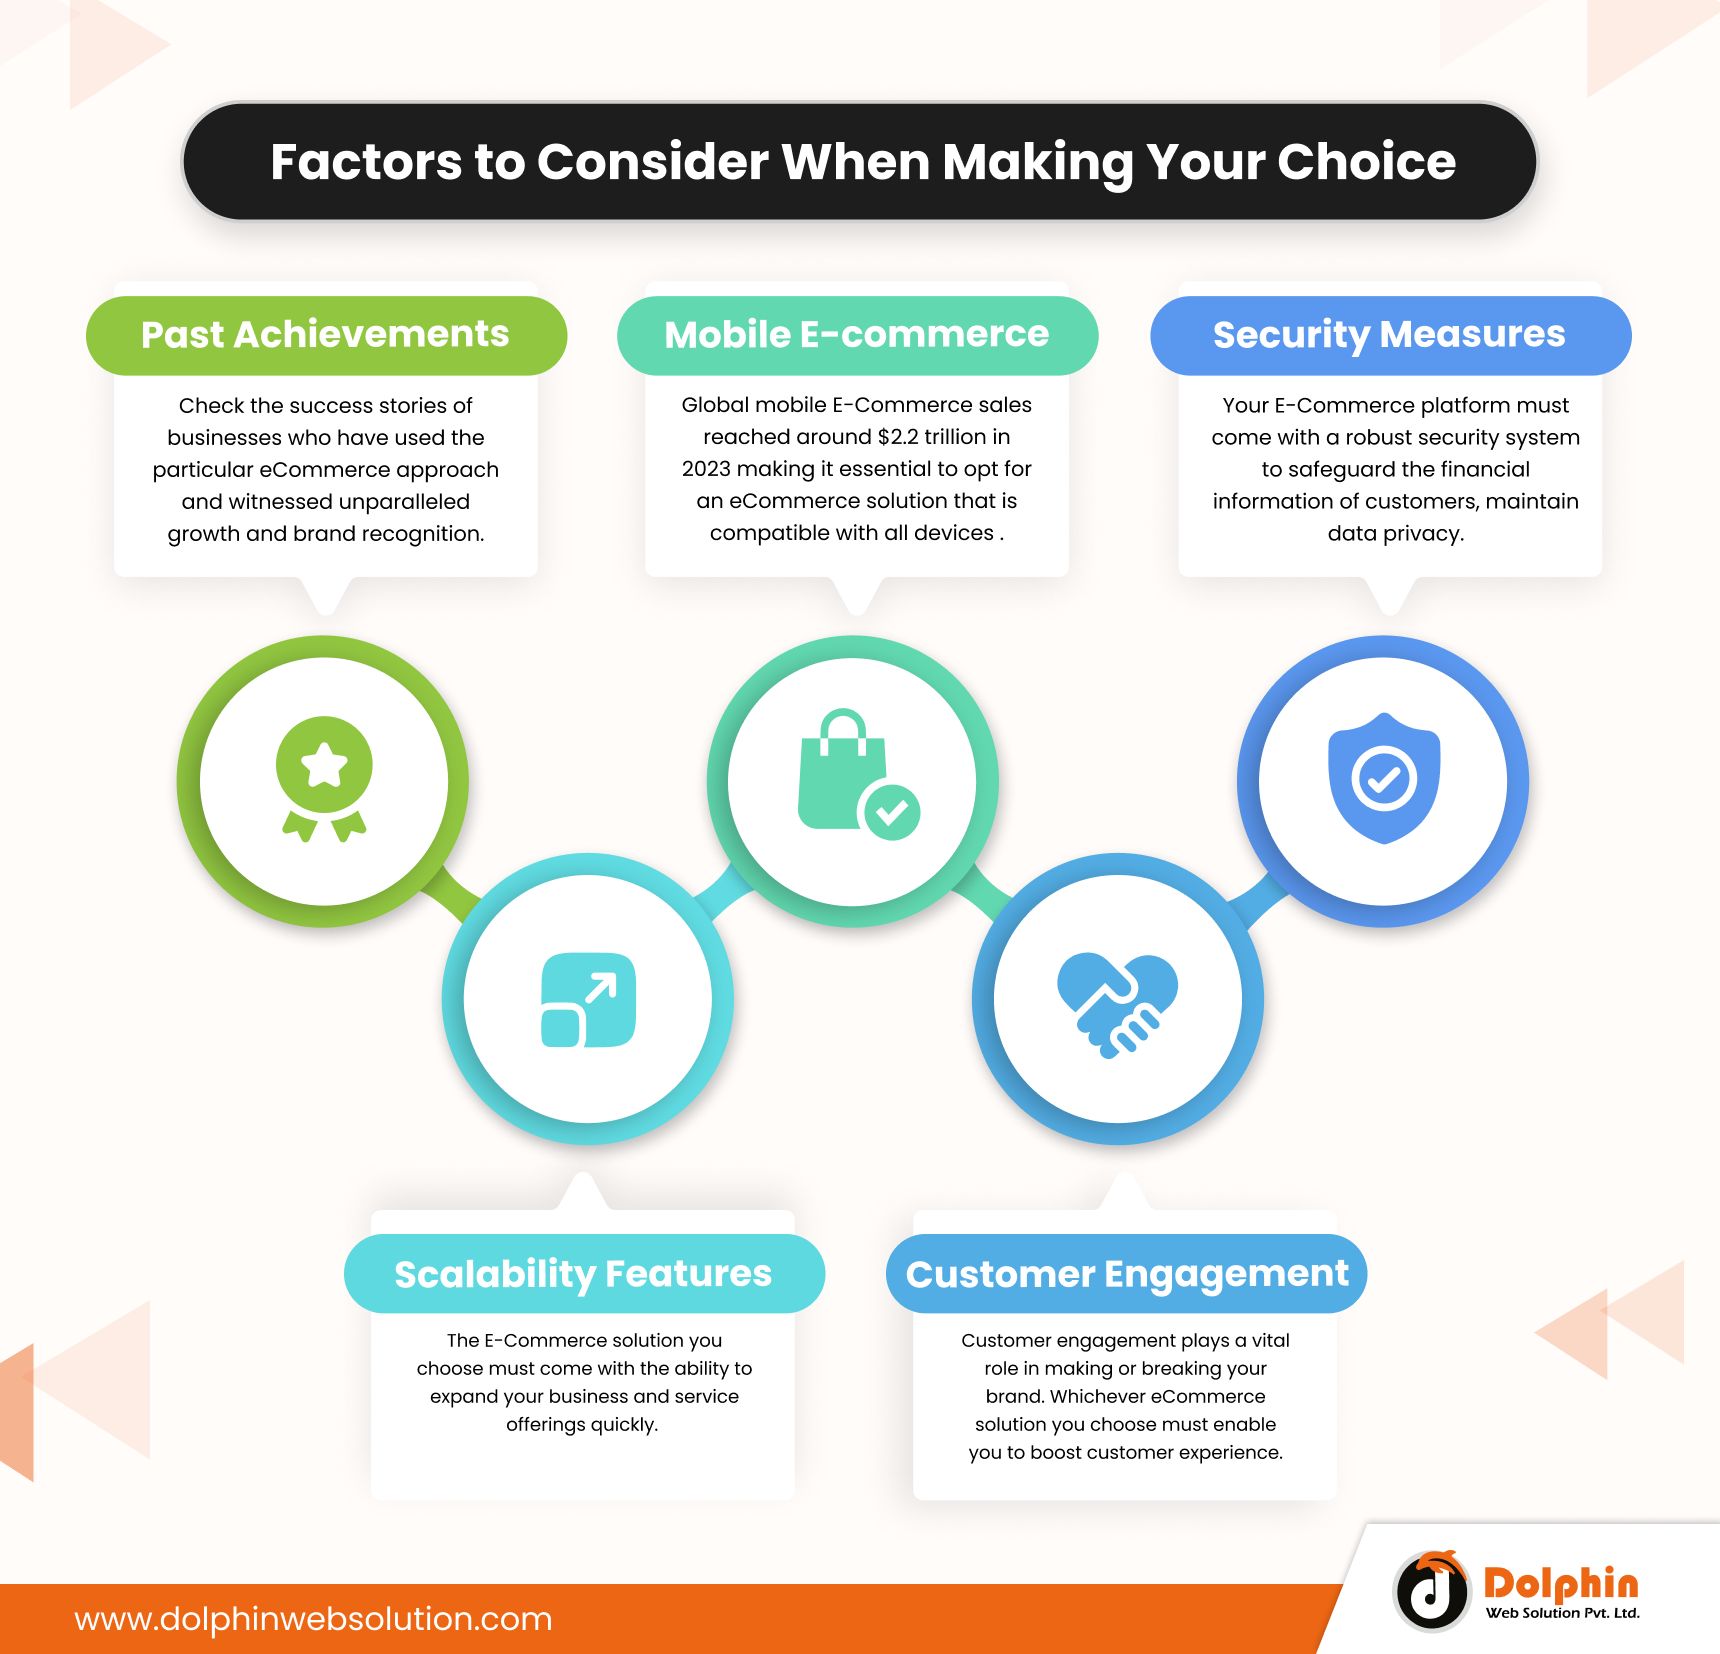 Factors to Consider When Making Your Choice